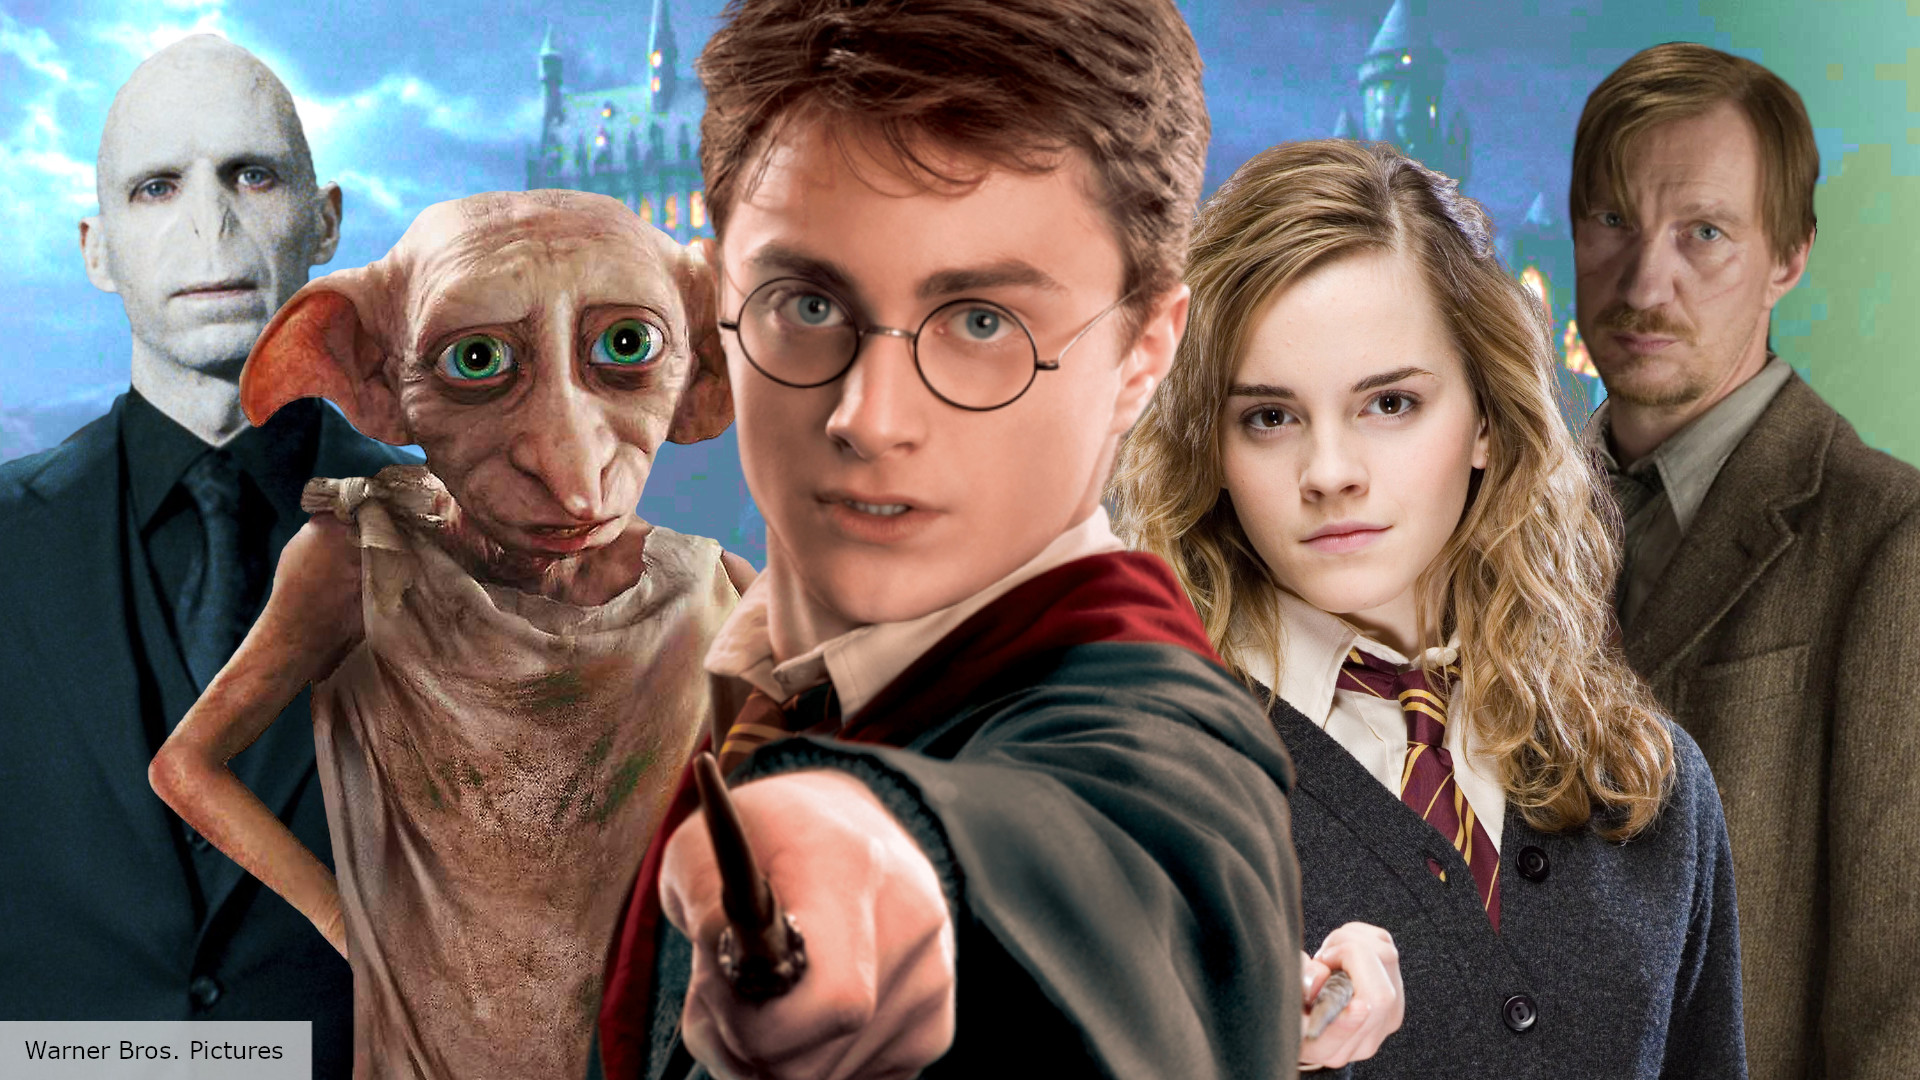 The 25 Best Harry Potter Characters - IGN